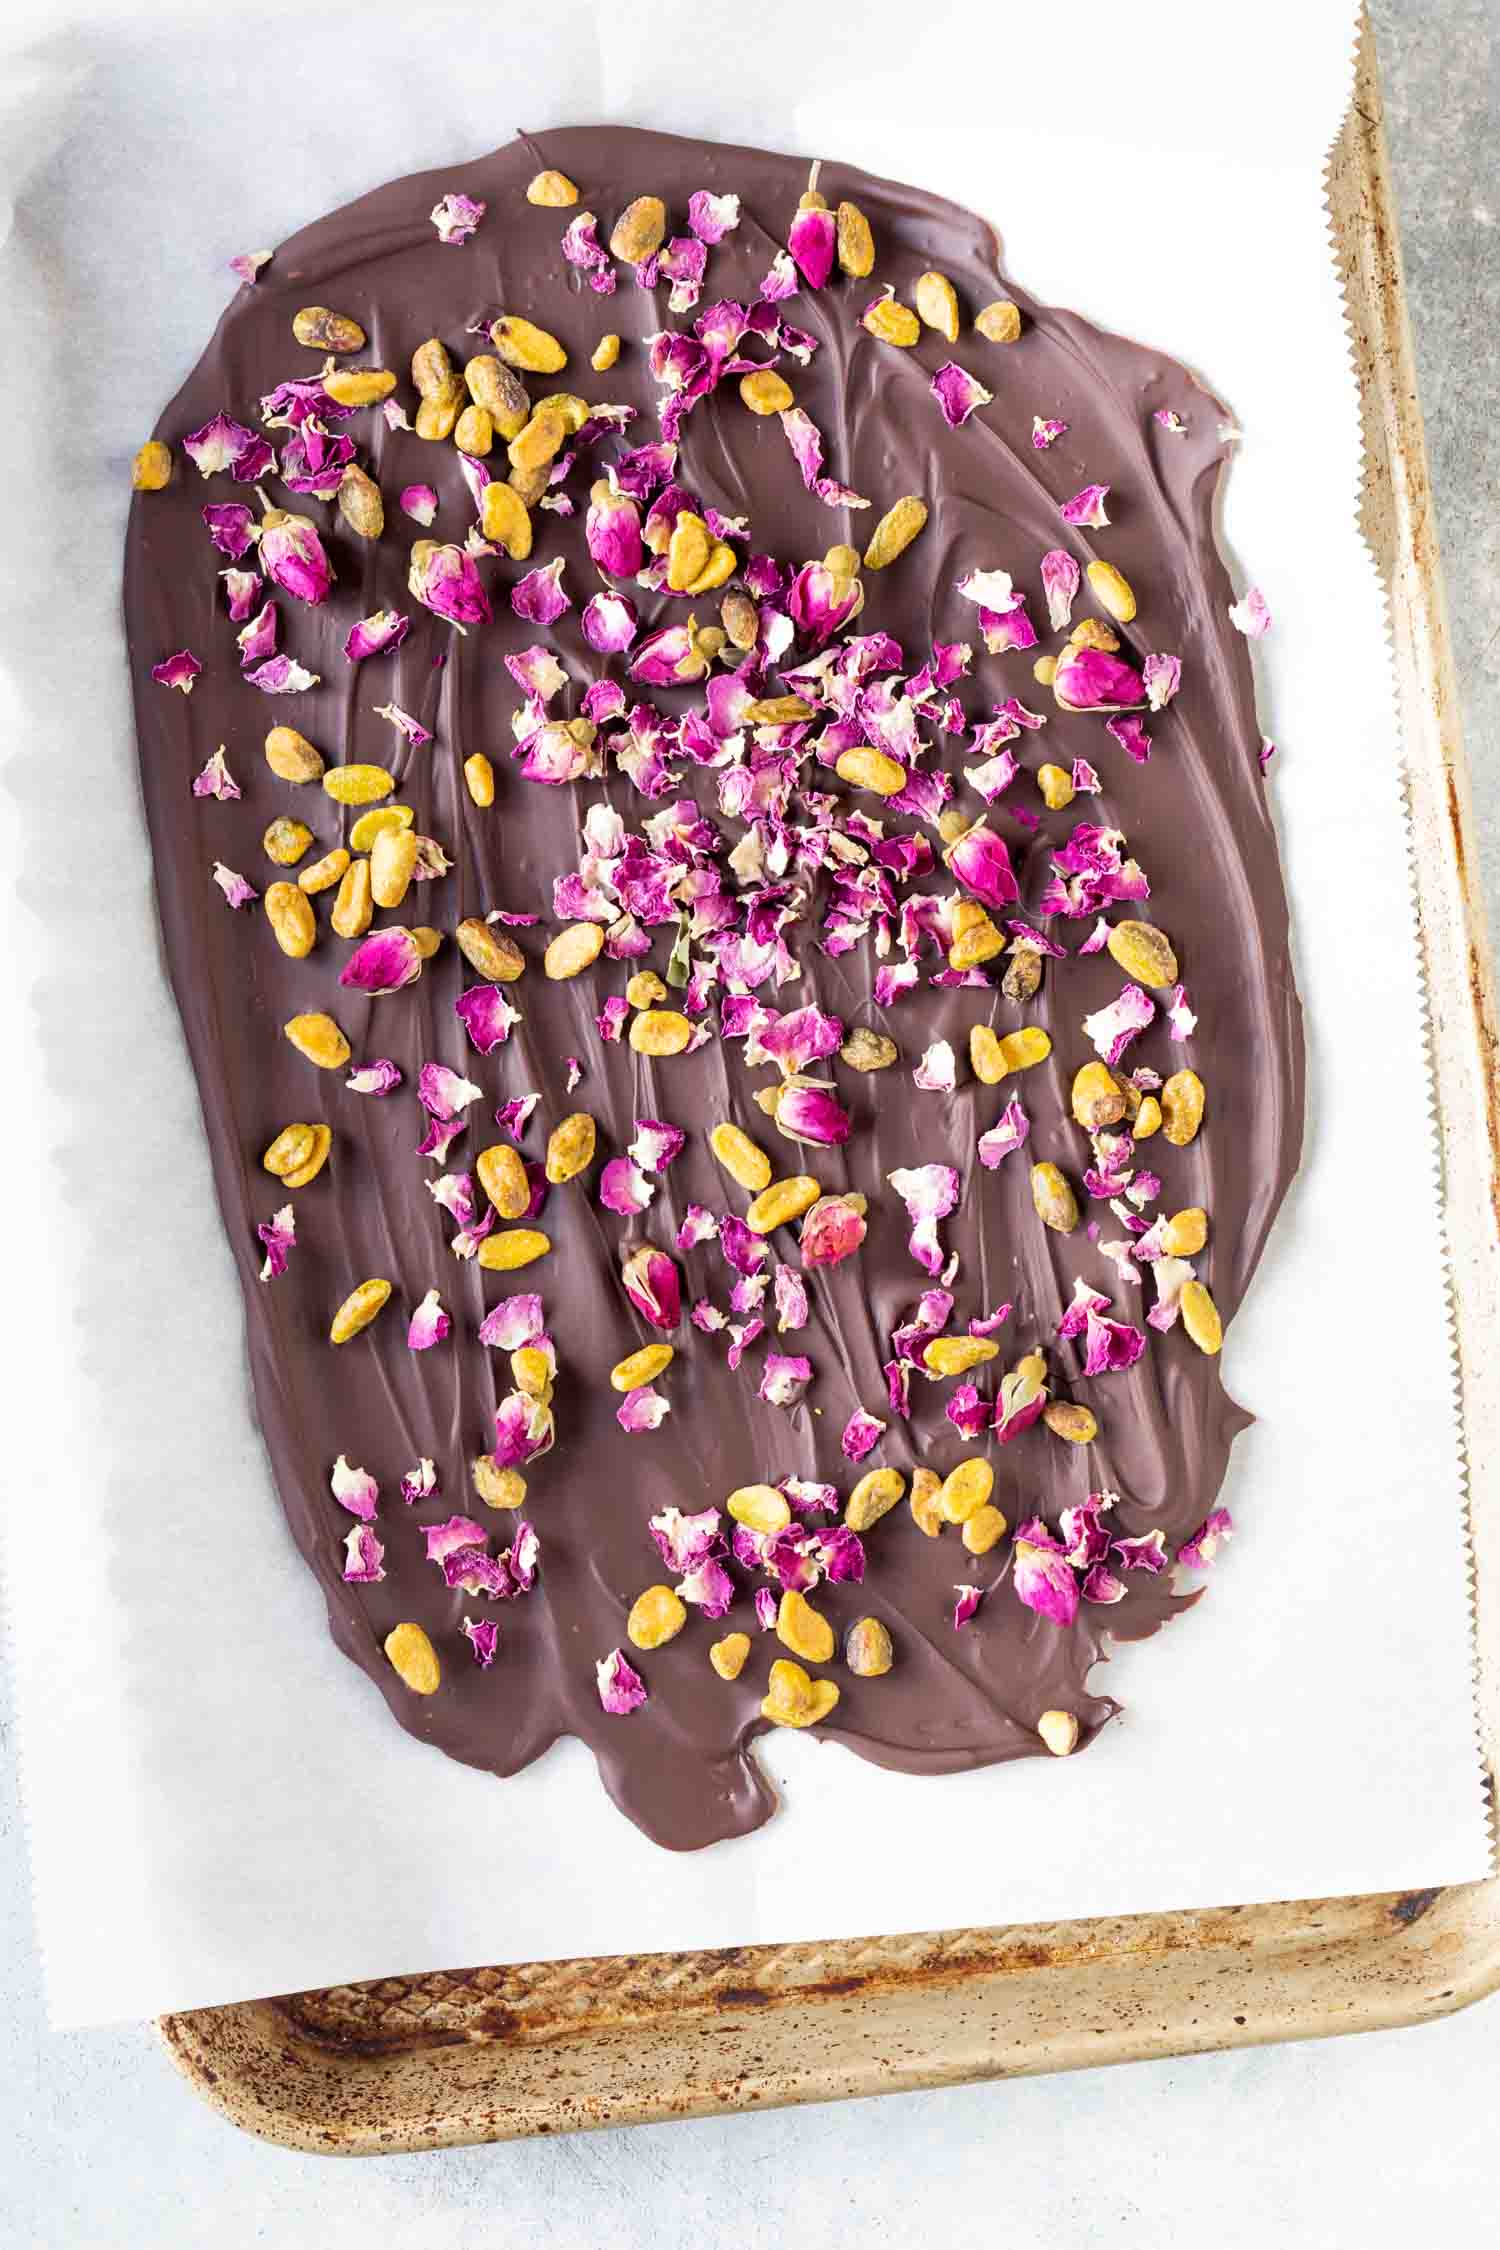 melted chocolate on parchment lined baking sheet topped with edible rose petals and pistachios